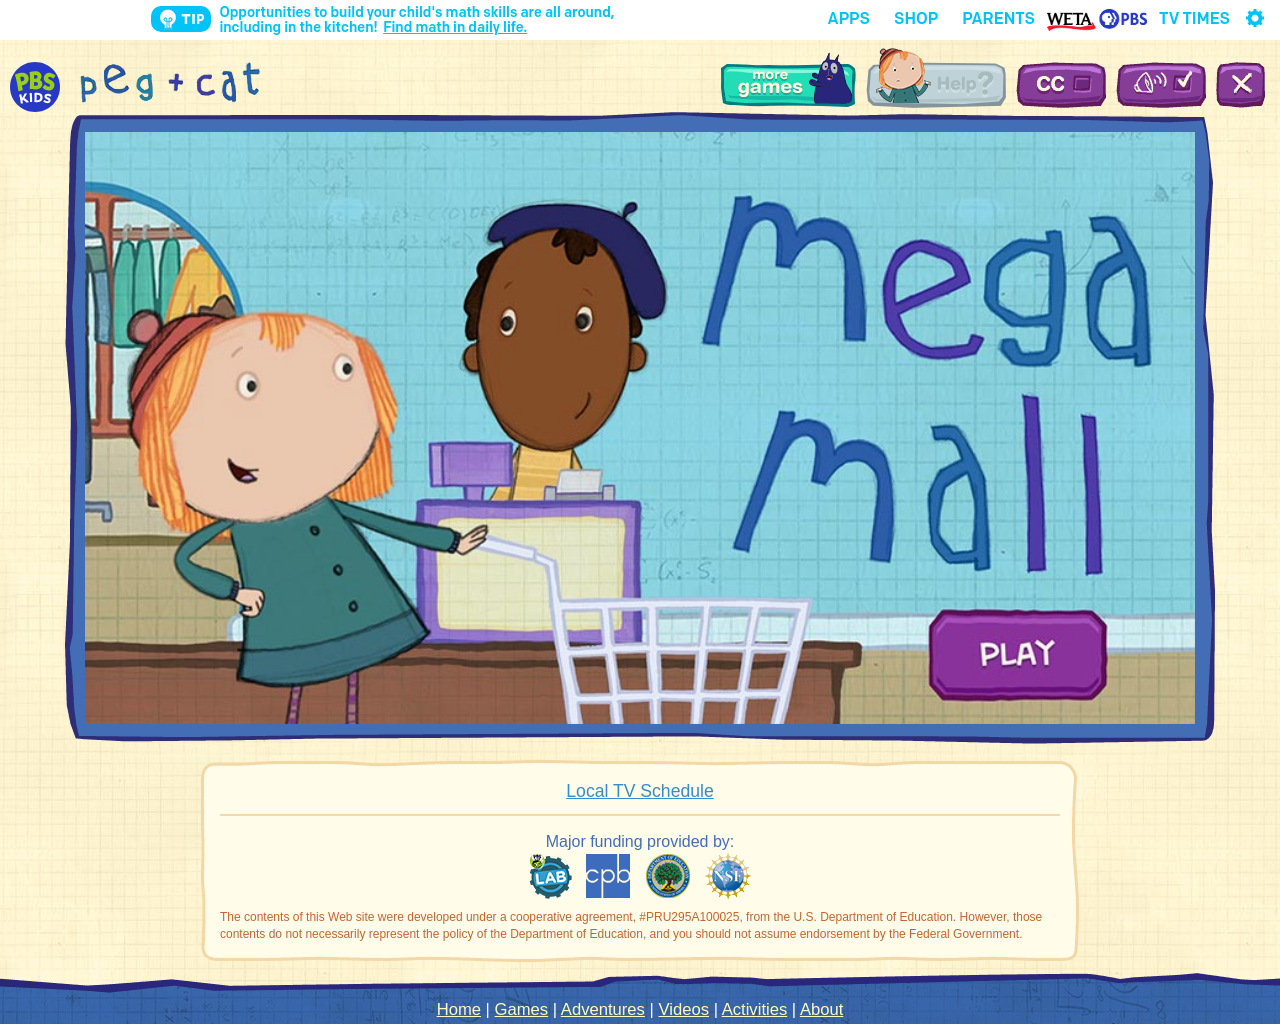 Help Peg and Cat shop at the mall